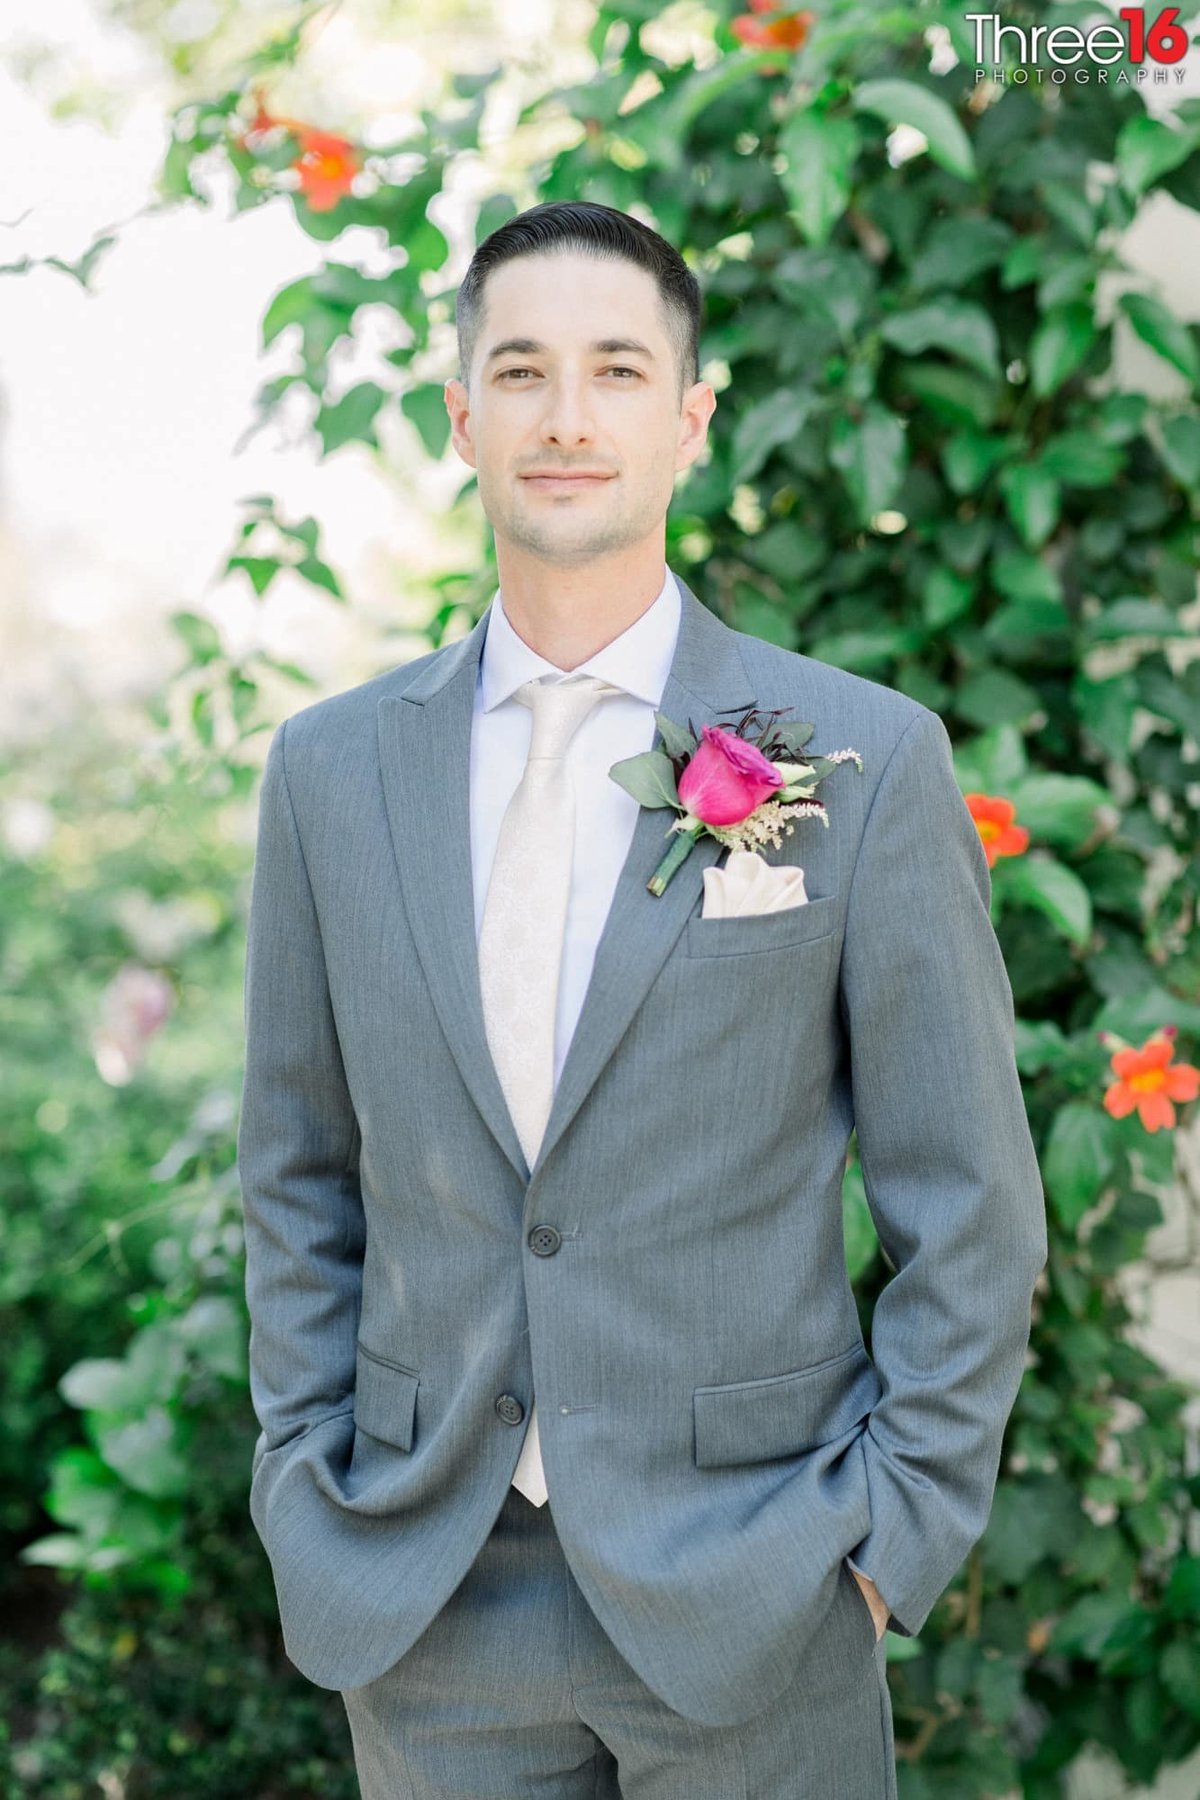 Groom poses with his hands in his pockets